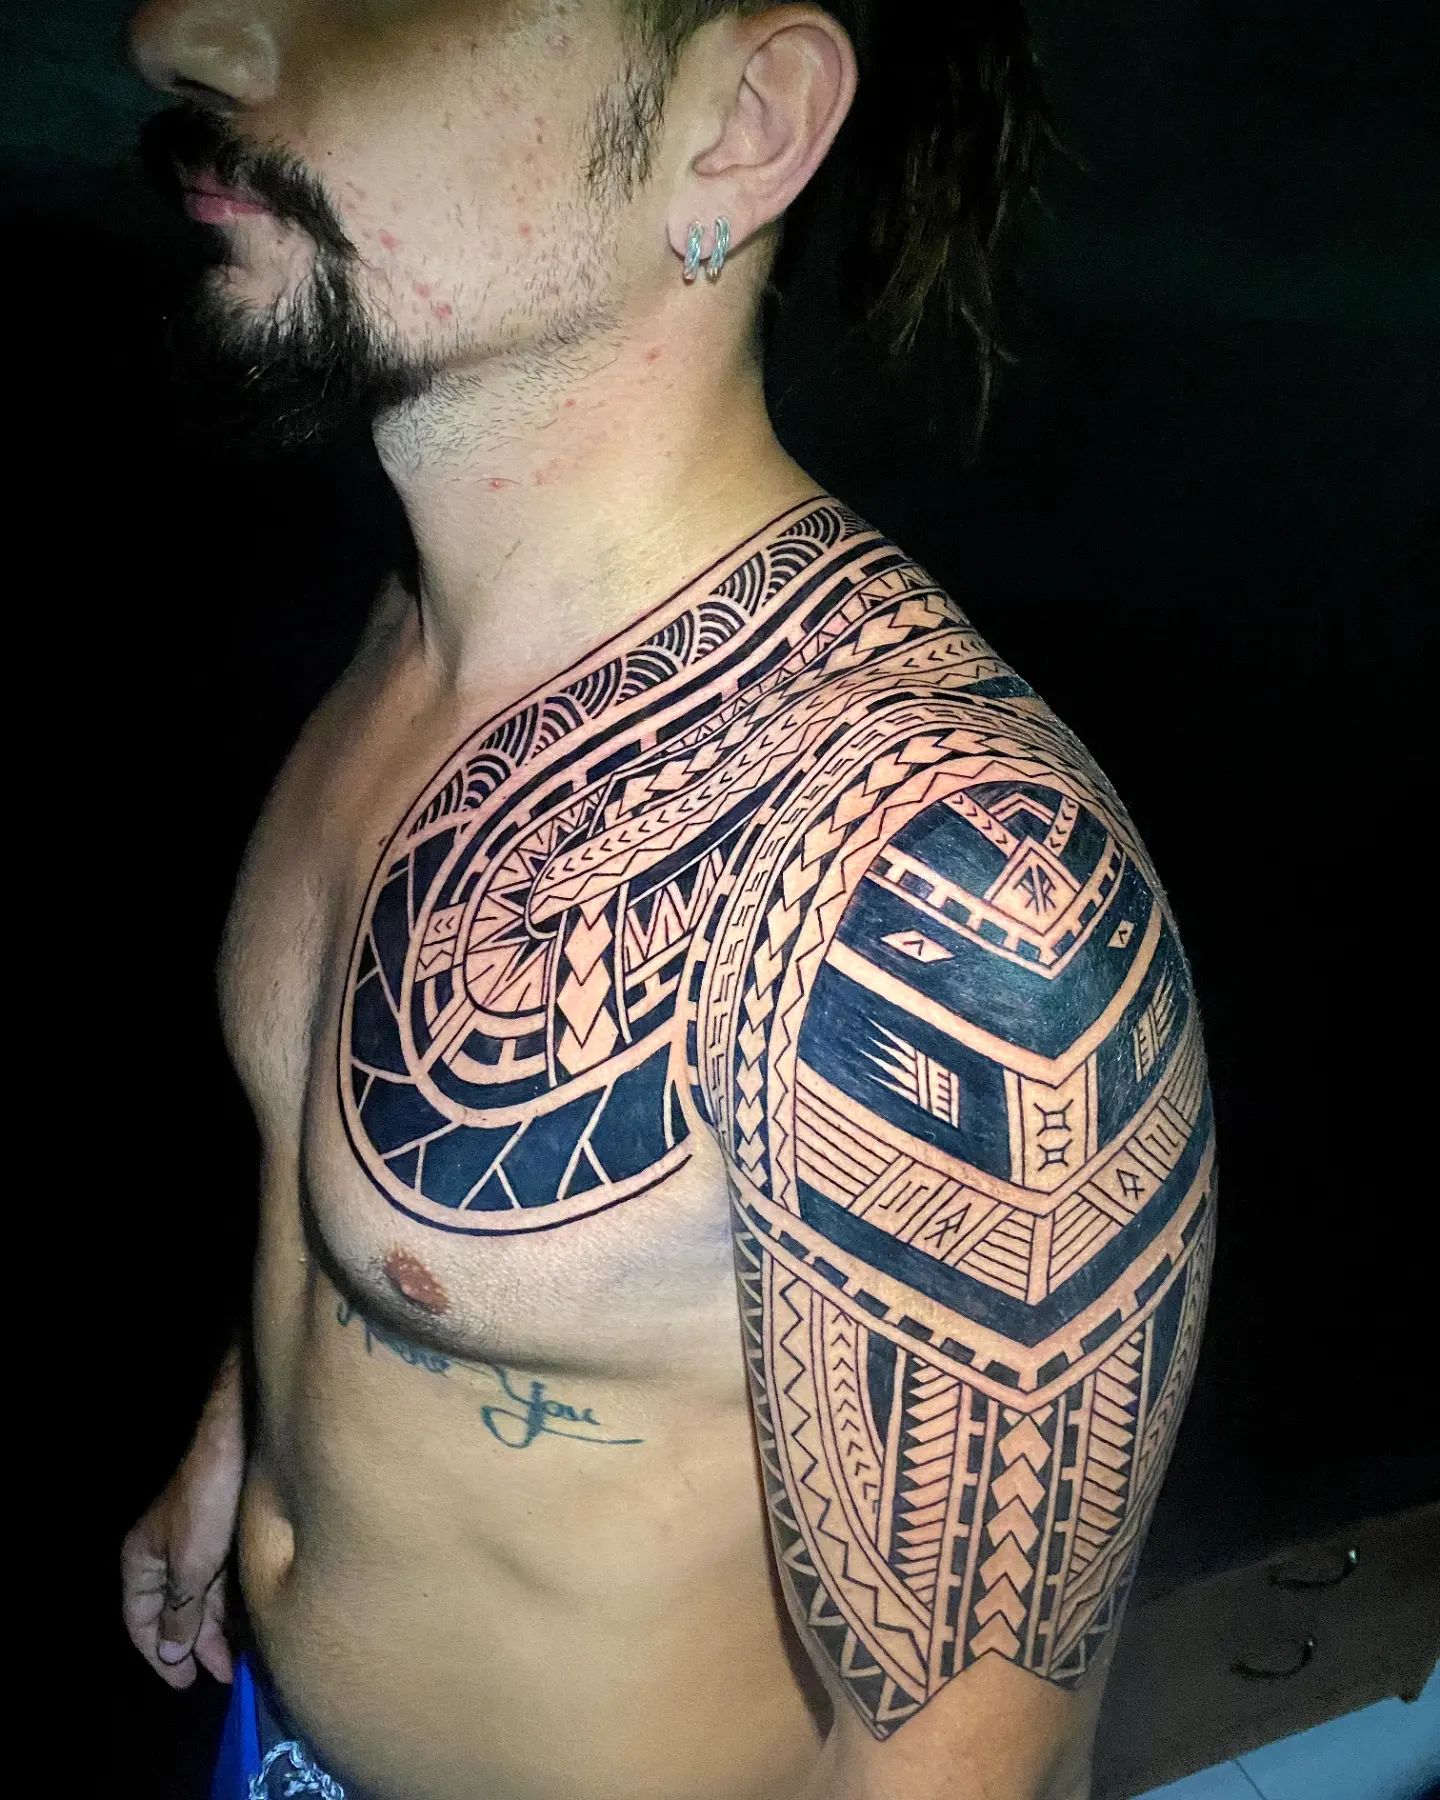 Massive Maori Front to Back Connected tattoo